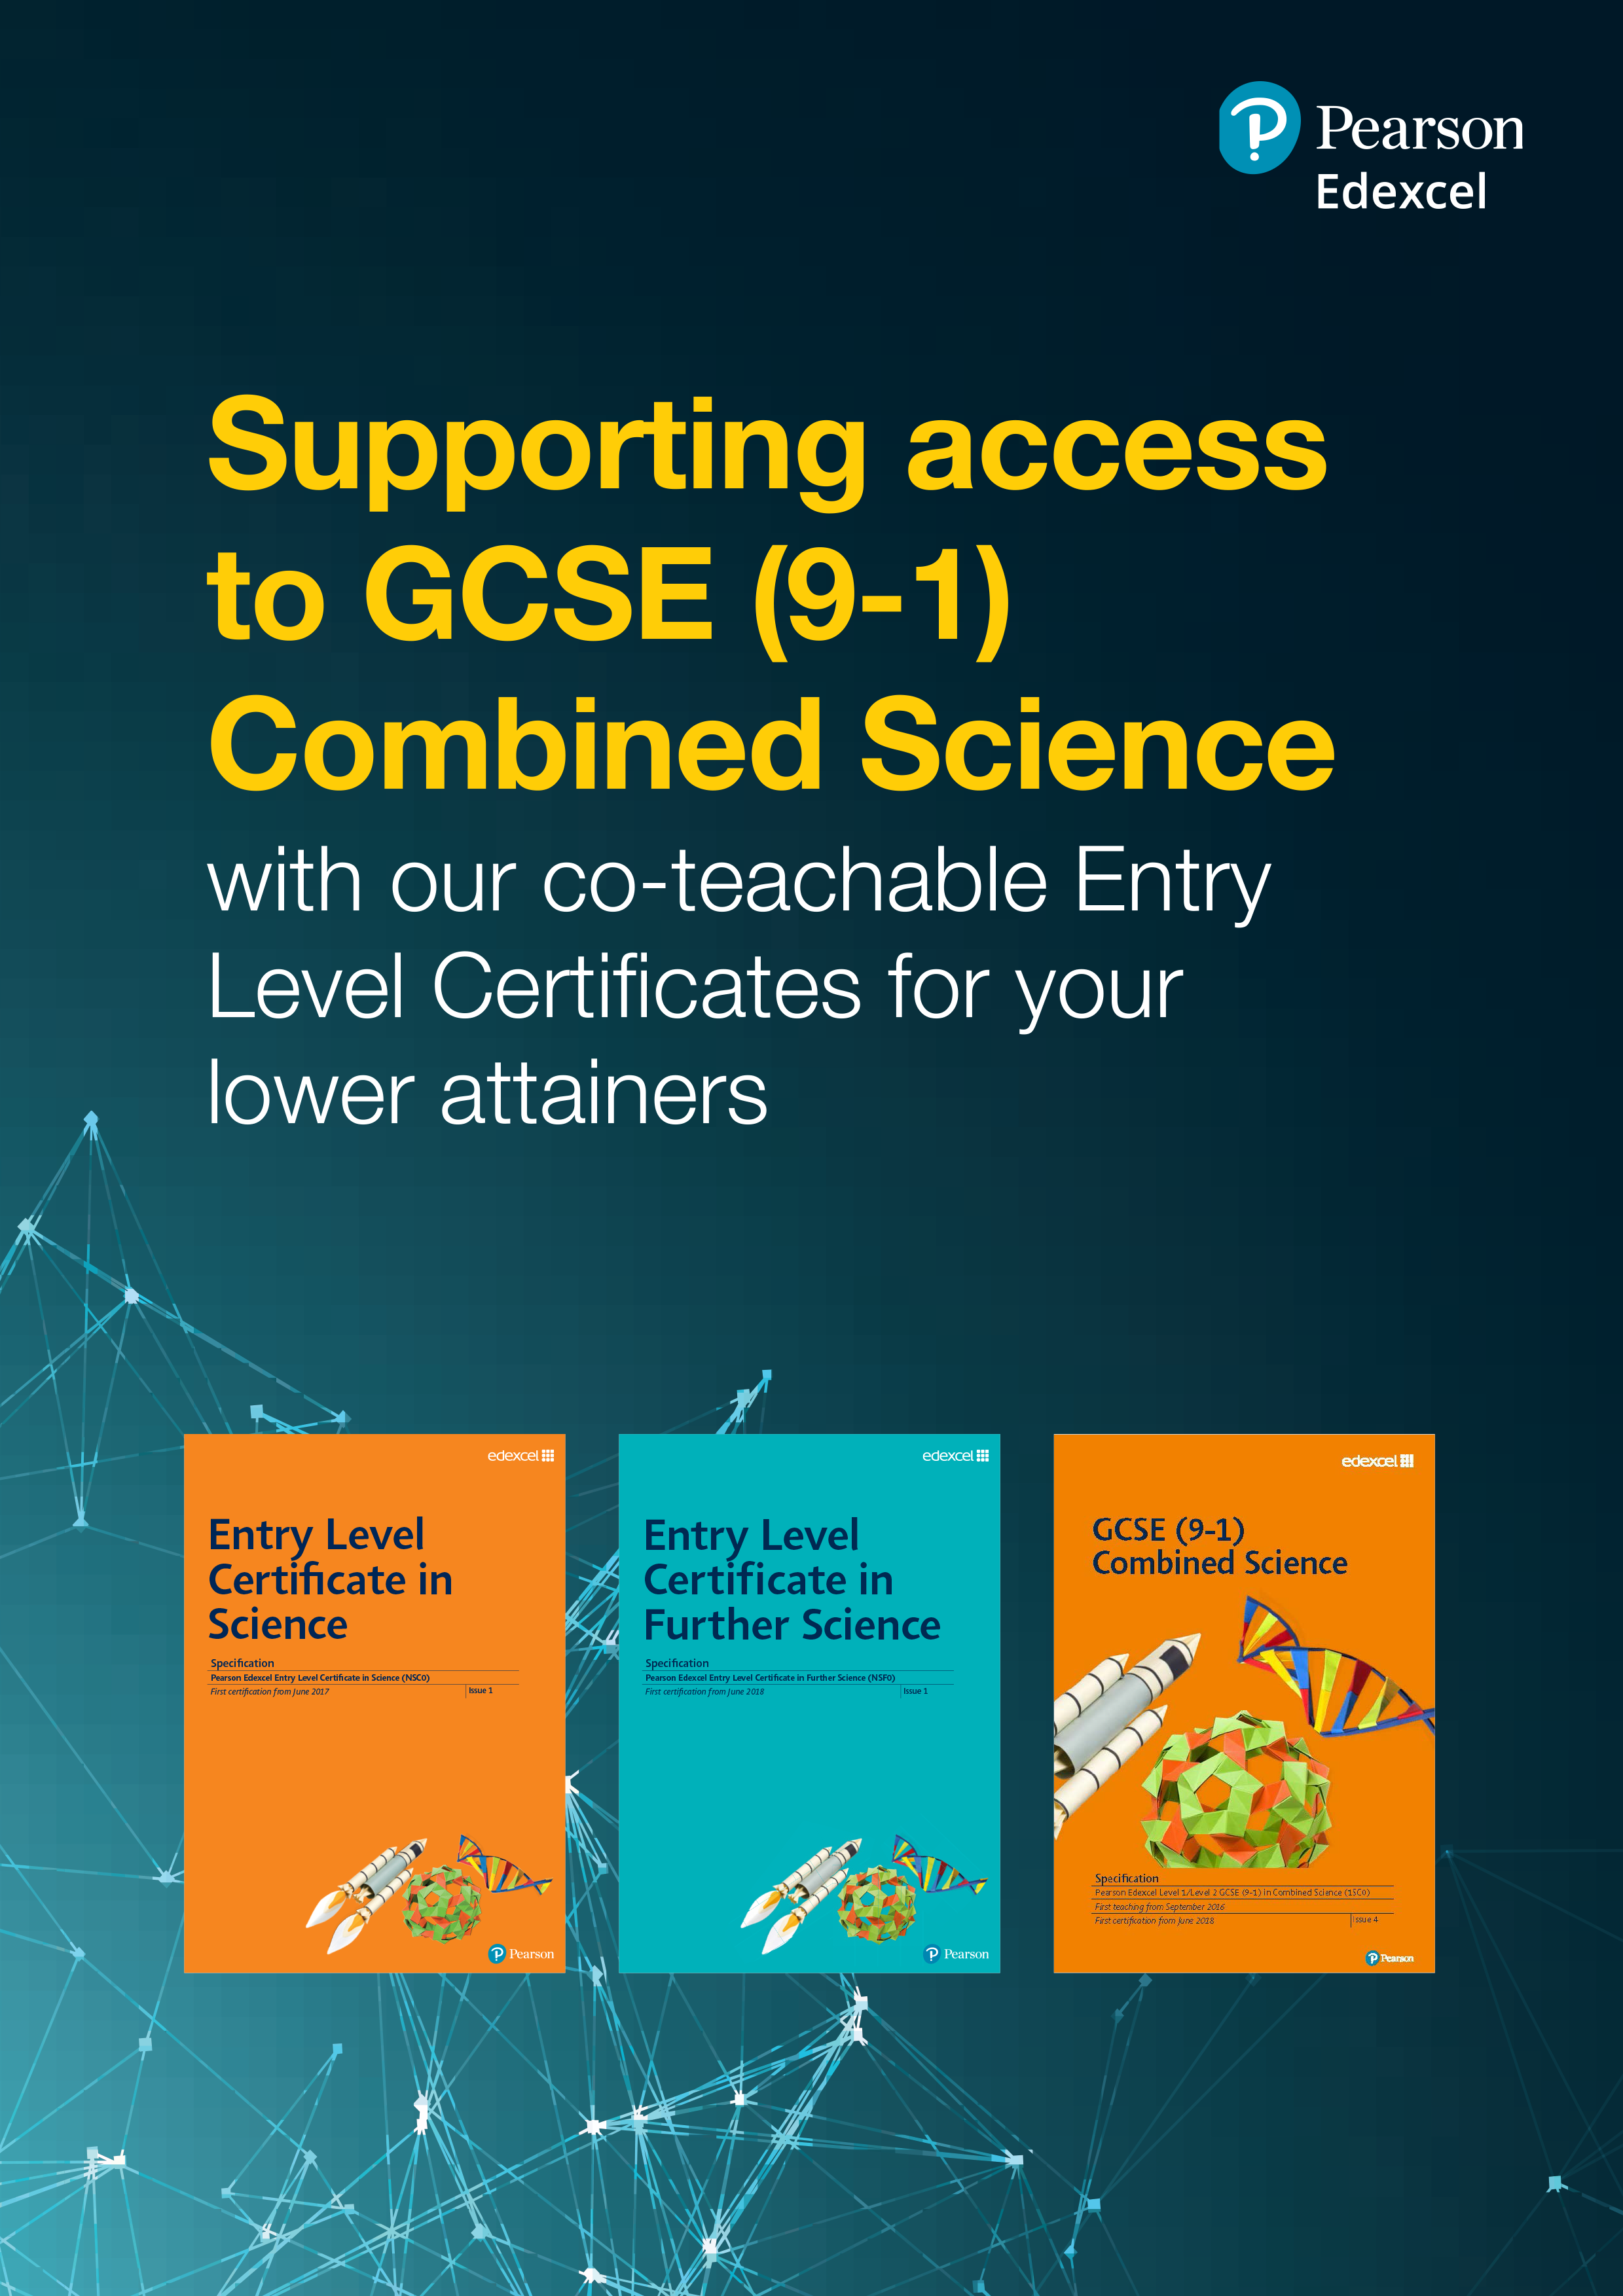 Supporting access to GCSE (9-1) Combined Science